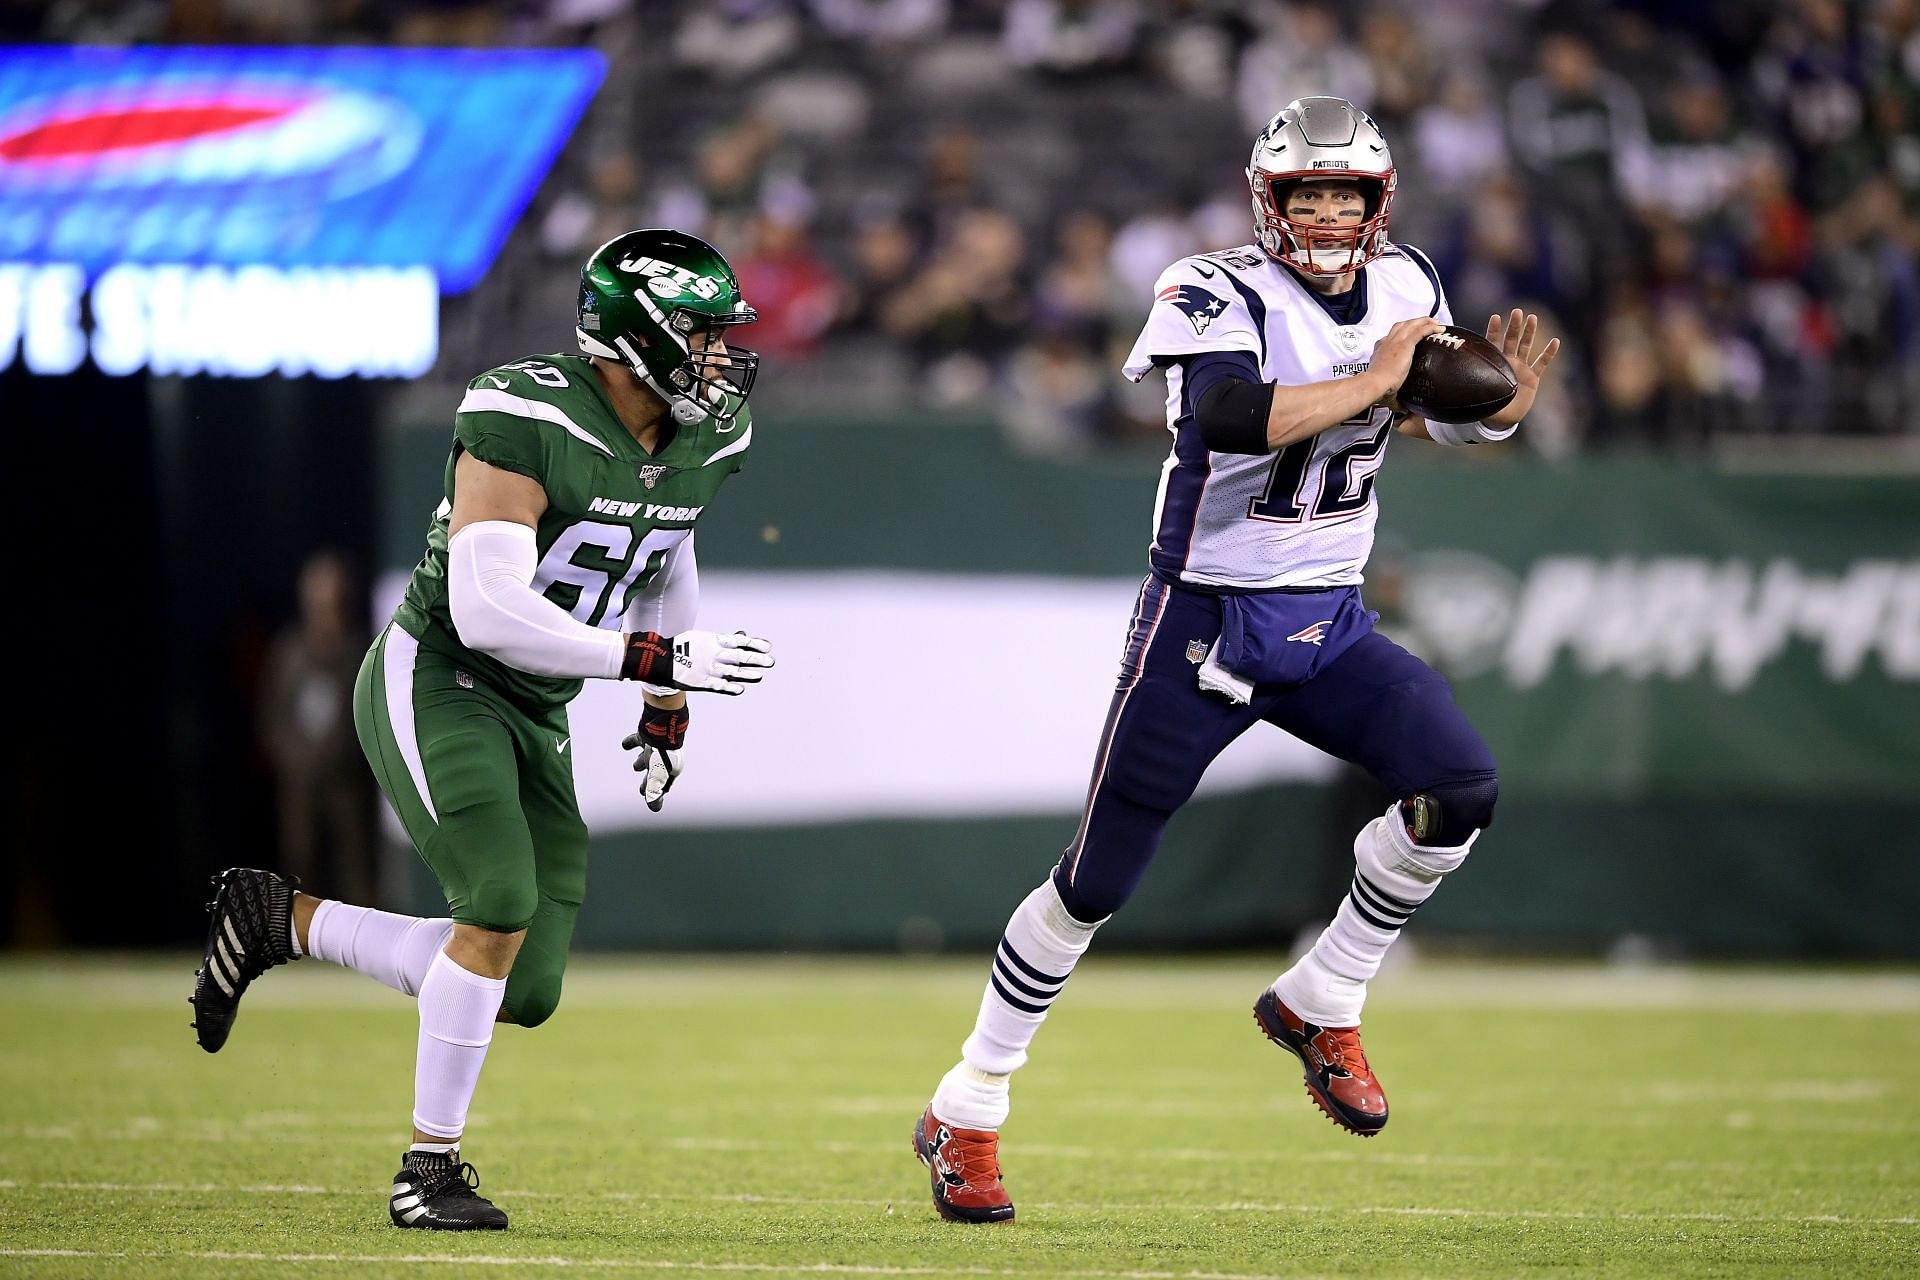 Tom Brady playing for the New England Patriots against the New York Jets